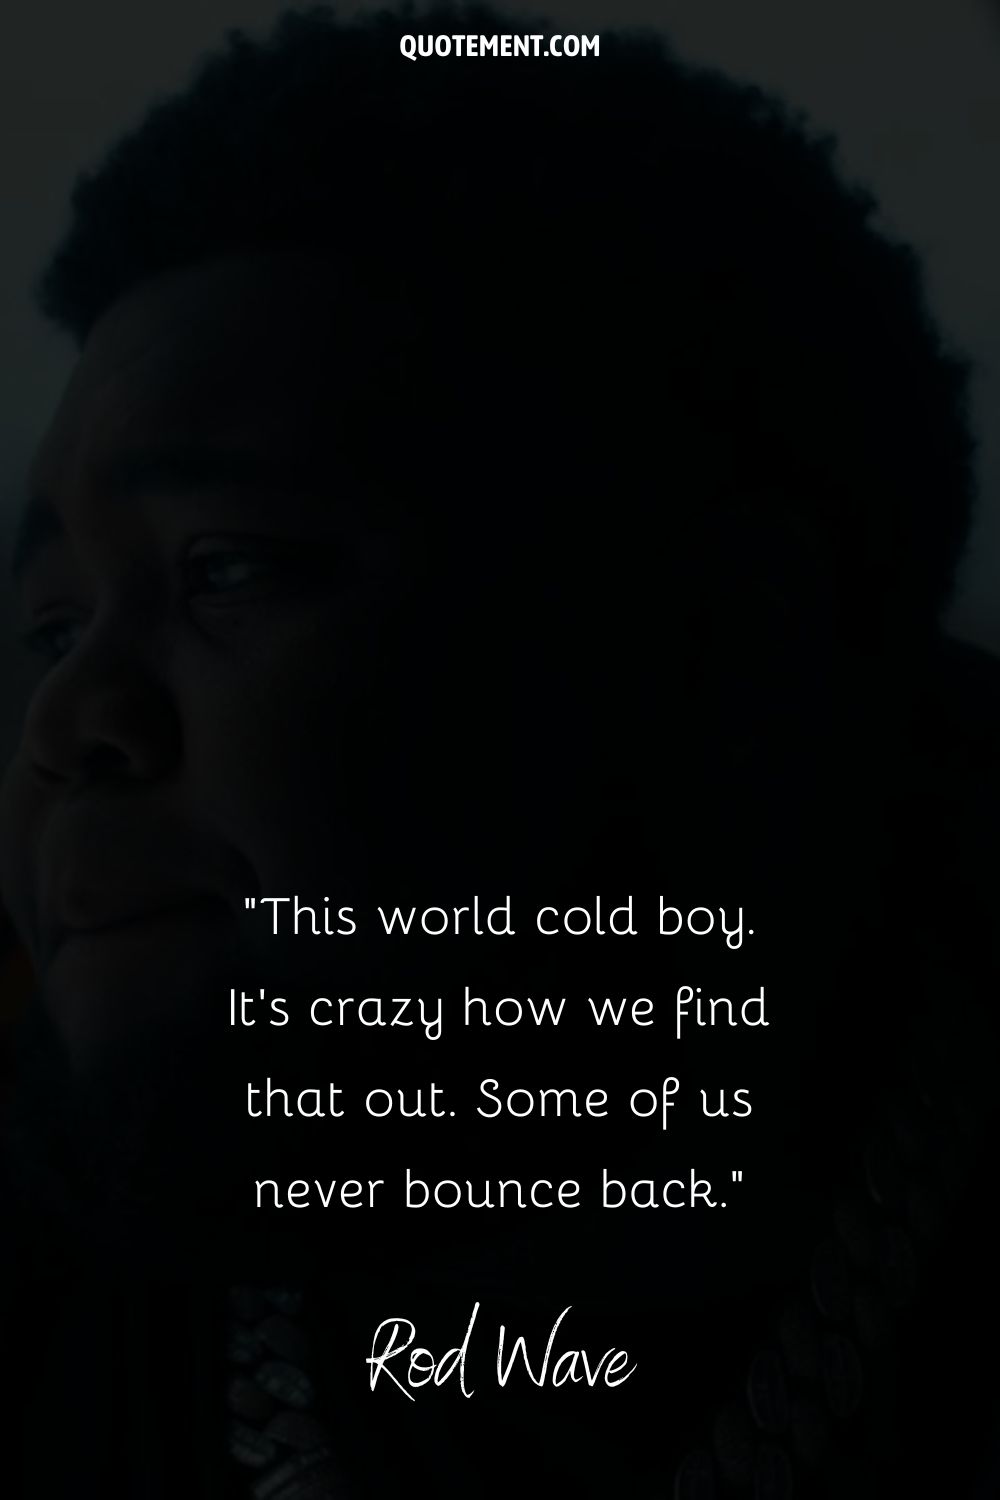 This world cold boy. It’s crazy how we find that out. Some of us never bounce back.”— Rod Wave